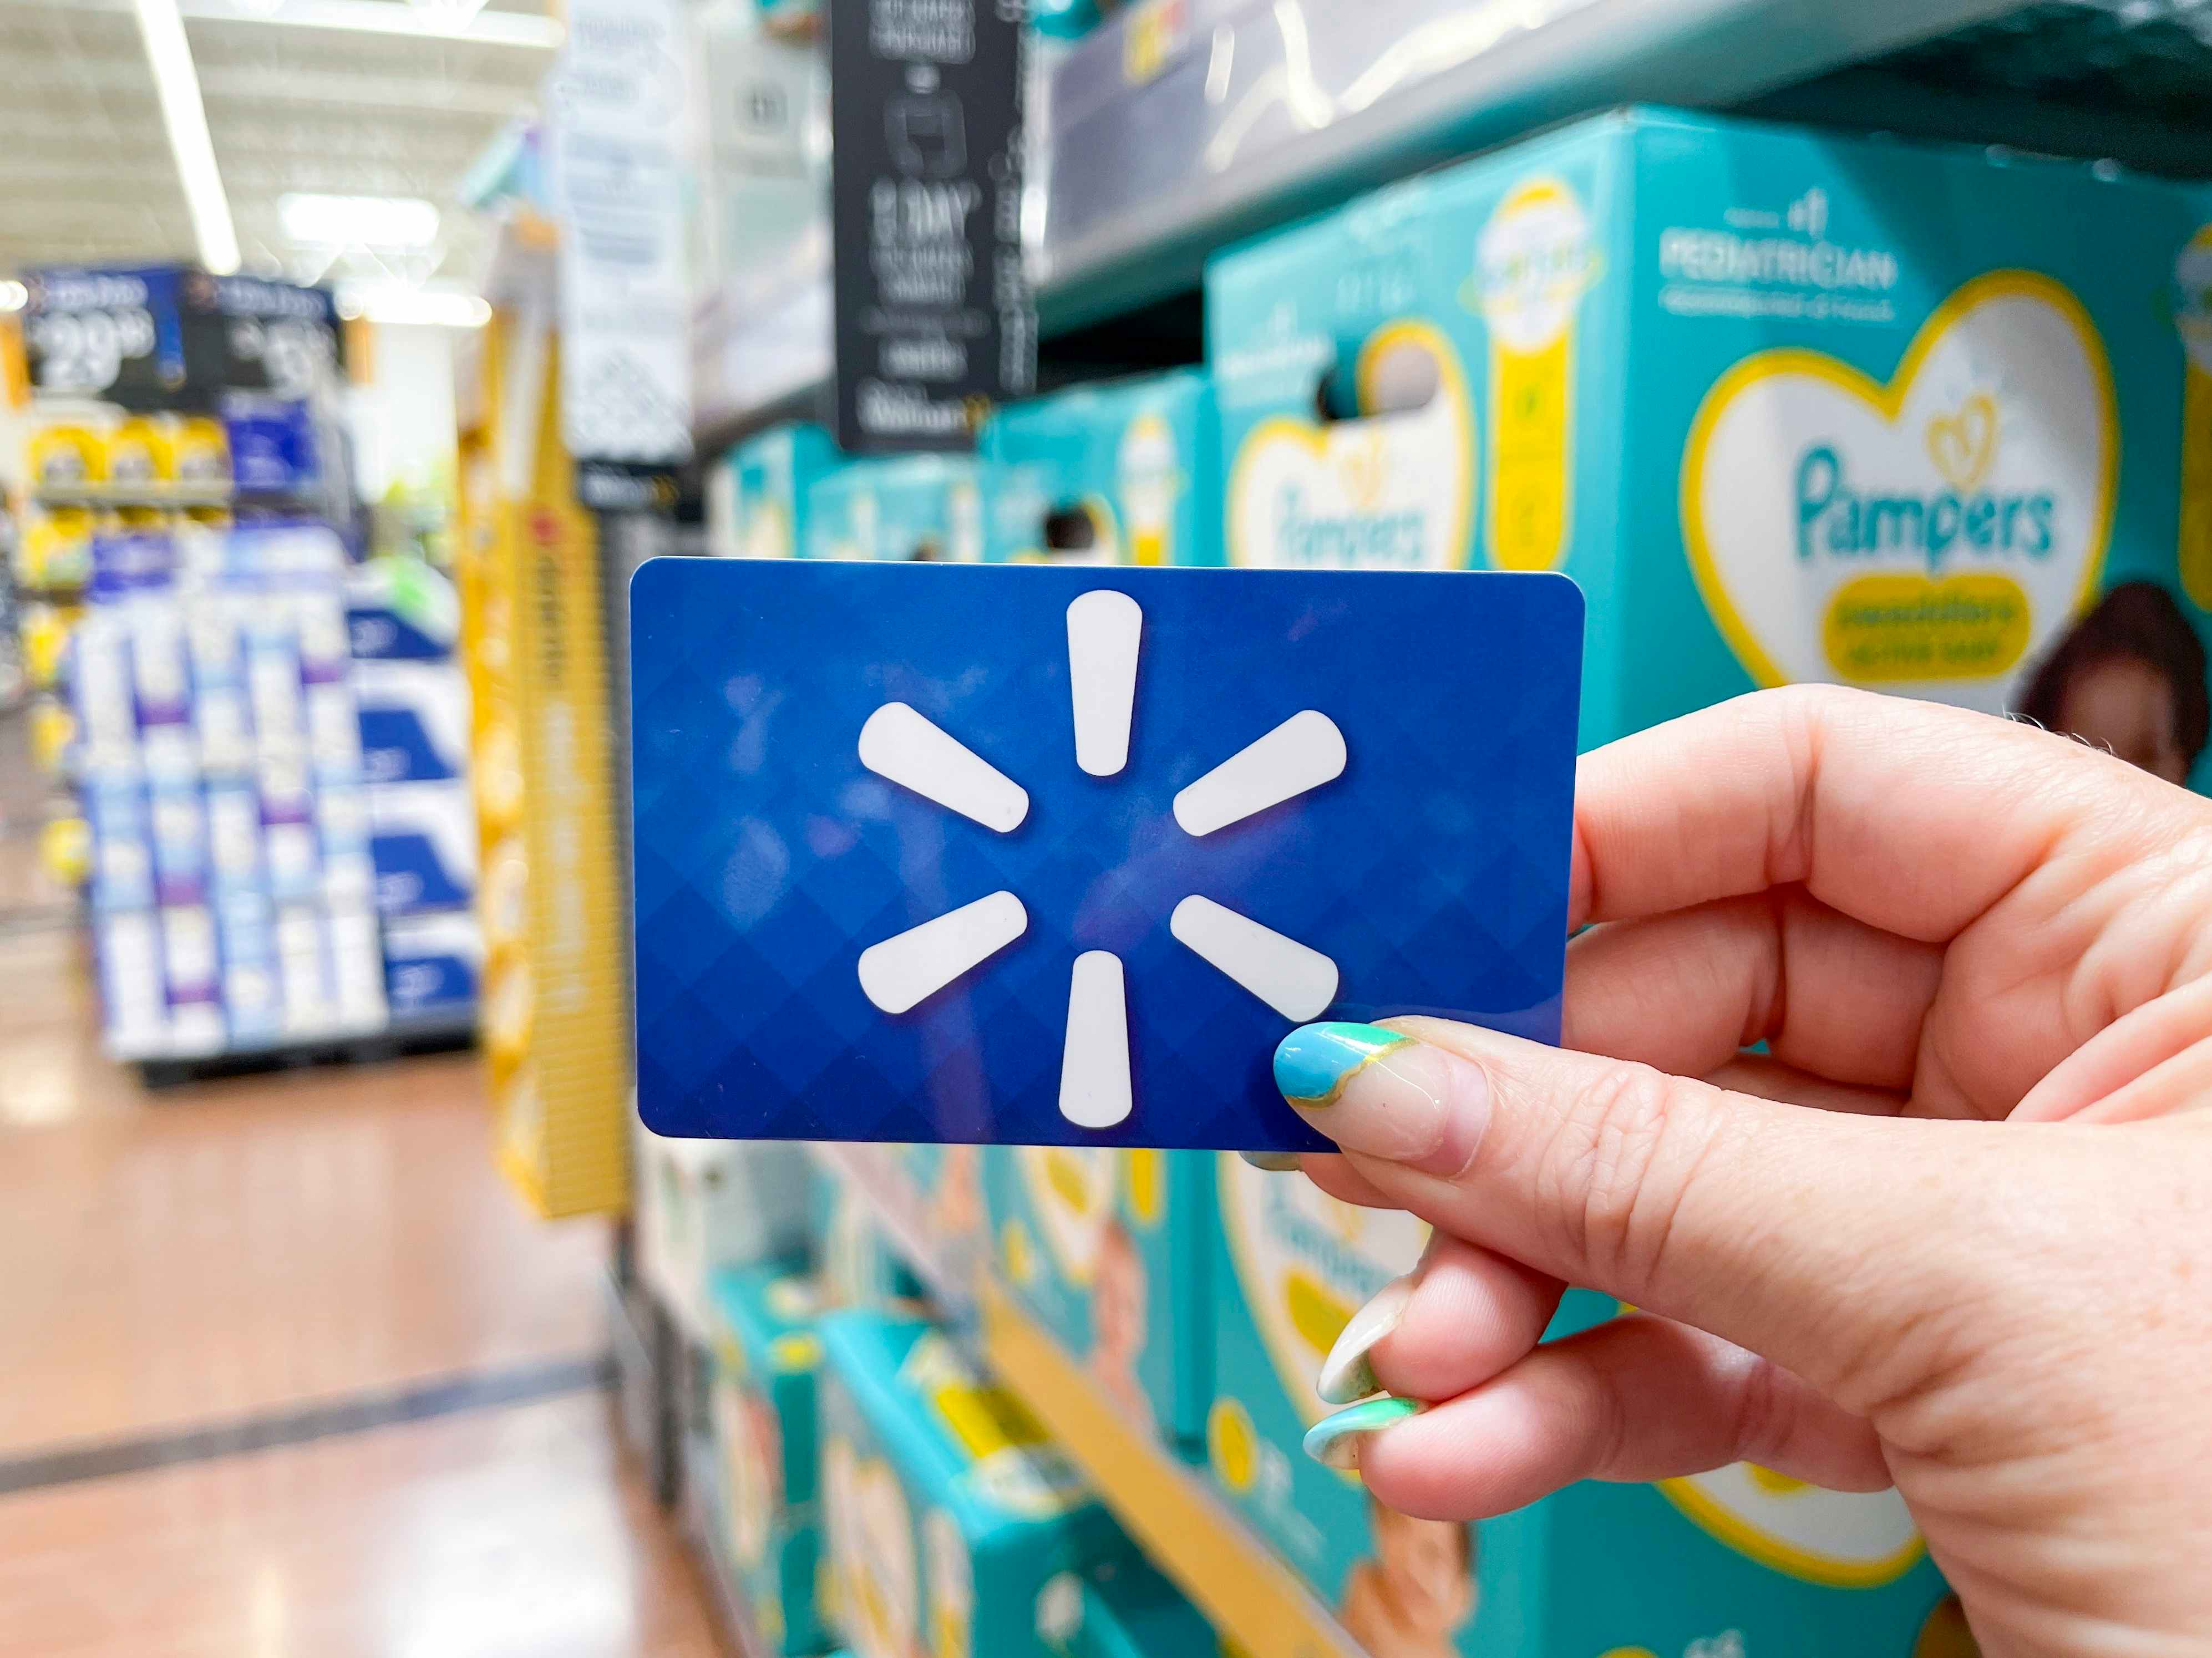 freebies for small business from walmart｜TikTok Search